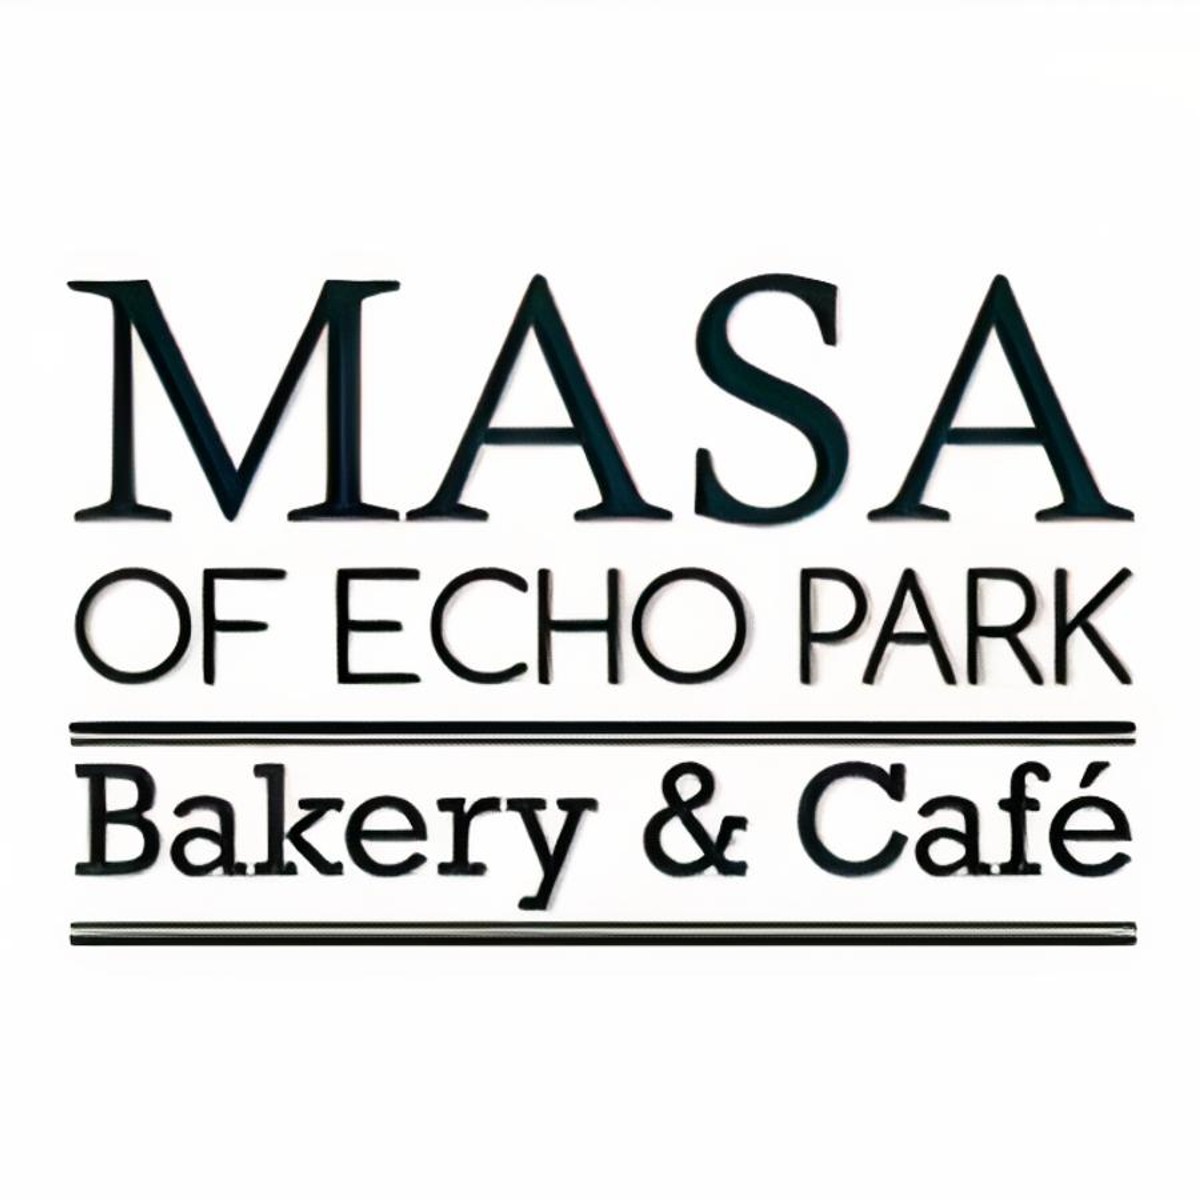 Chicago Deep Dish Pizza in Los Angeles is Masa of Echo Park